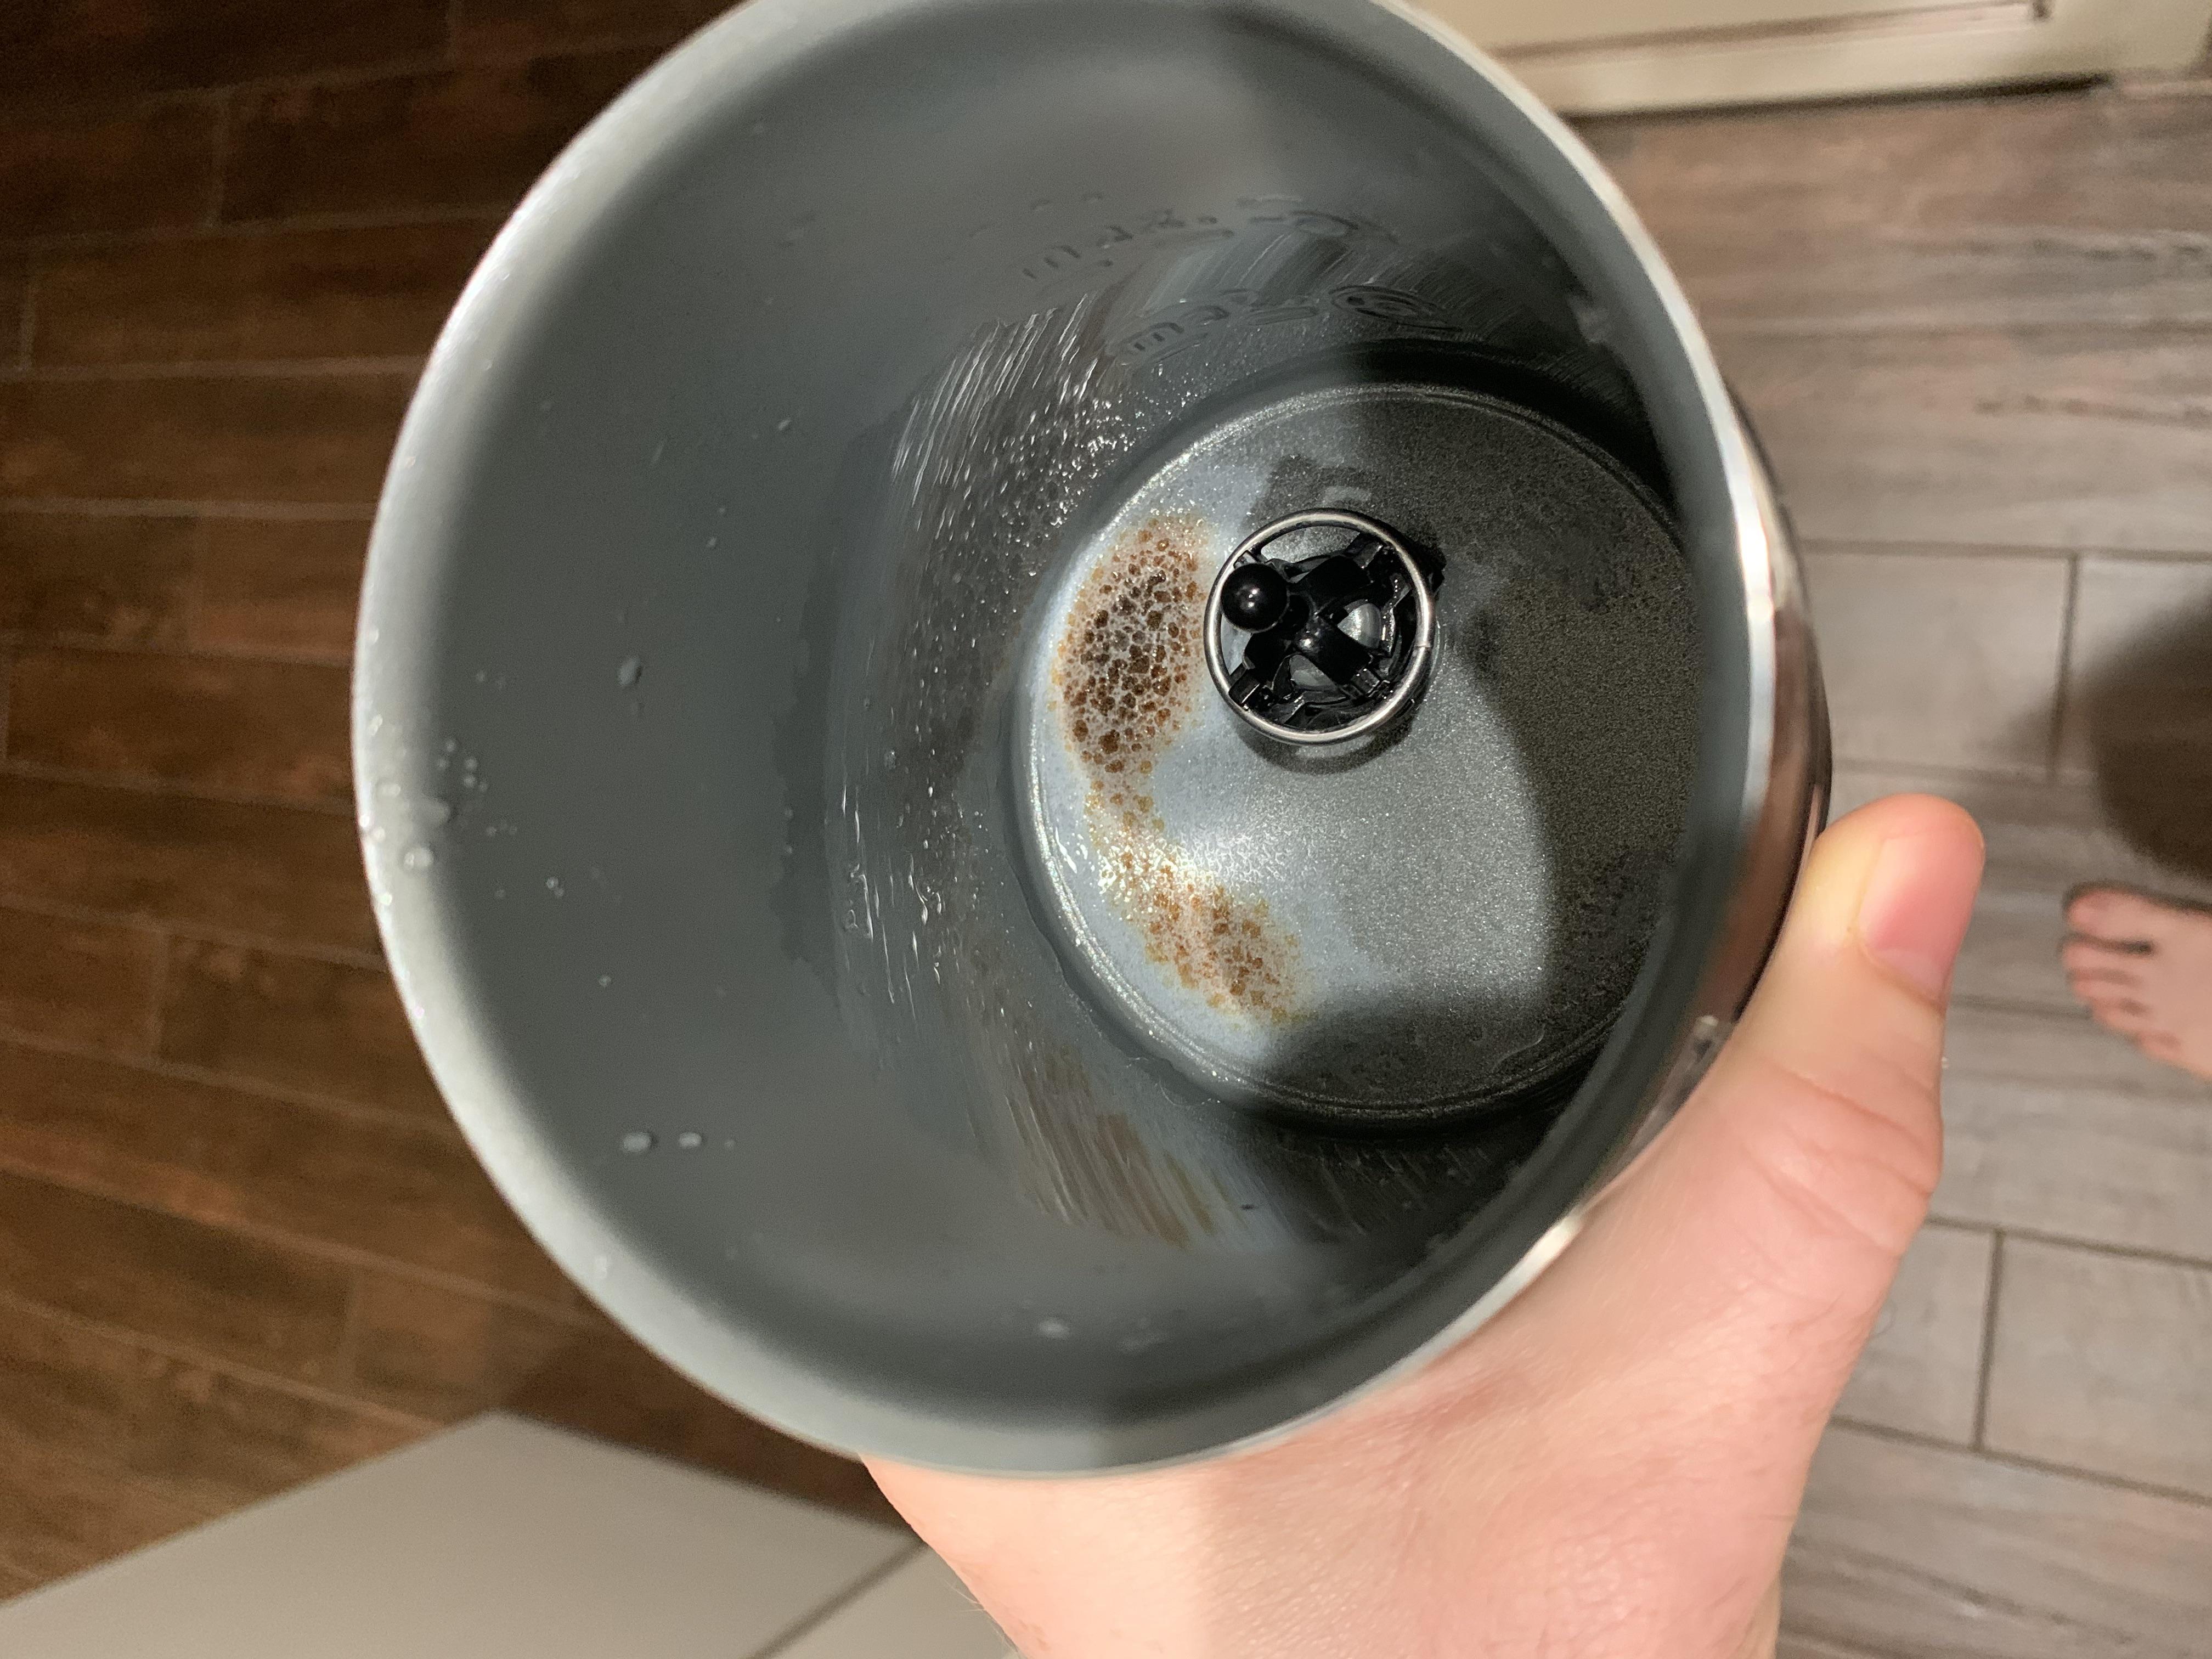 How to Clean Nespresso Milk Frother? 